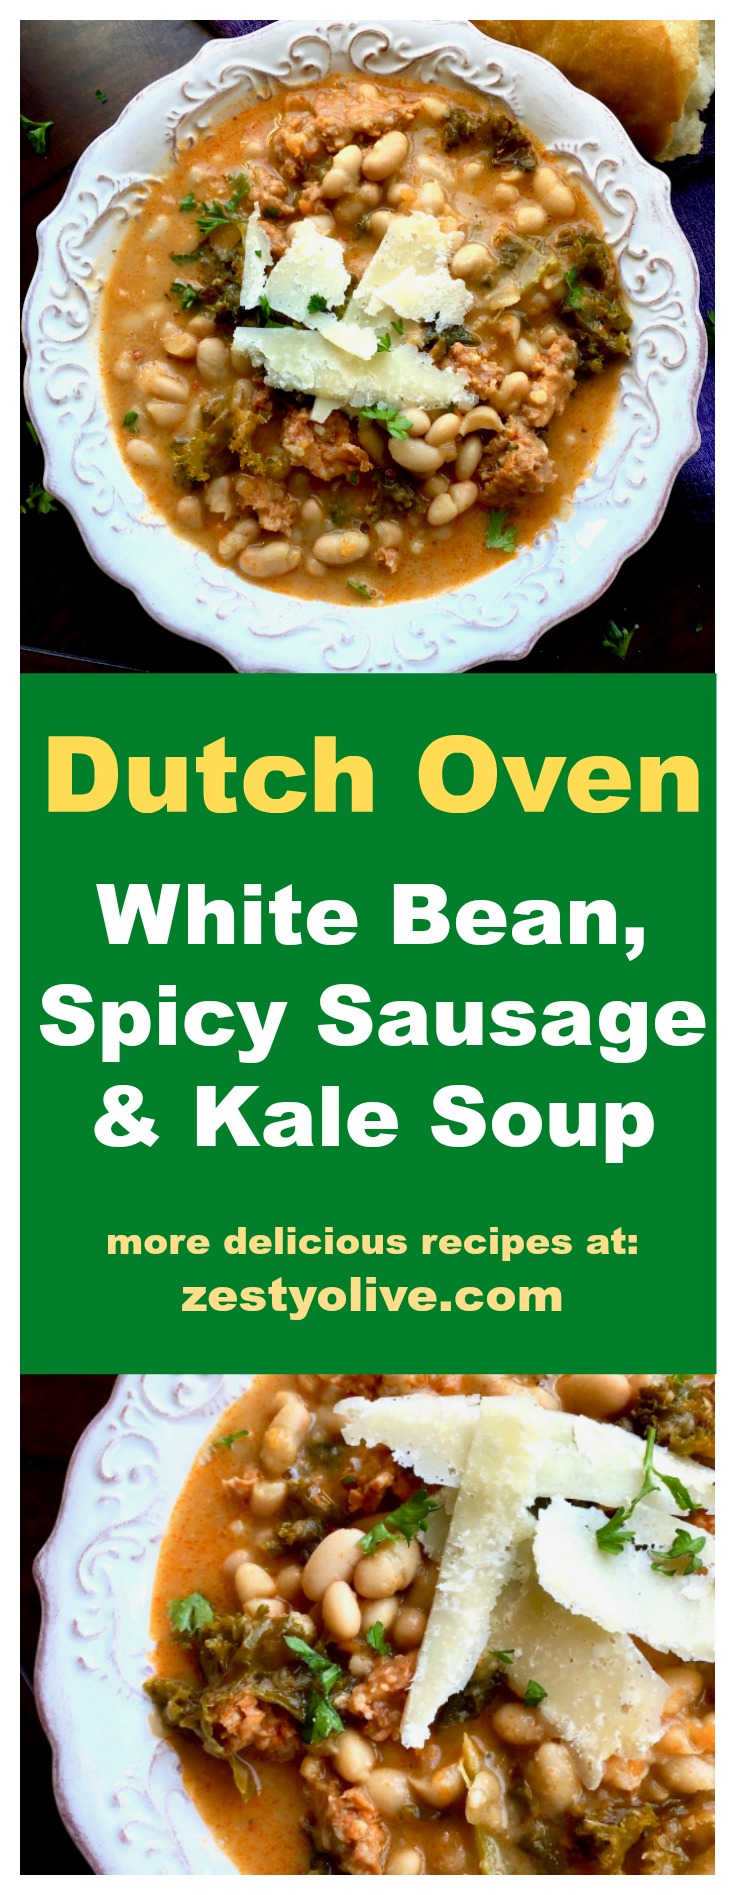 This delicious Dutch Oven White Bean, Spicy Sausage and Kale Soup is pure comfort food for the fall and winter seasons.